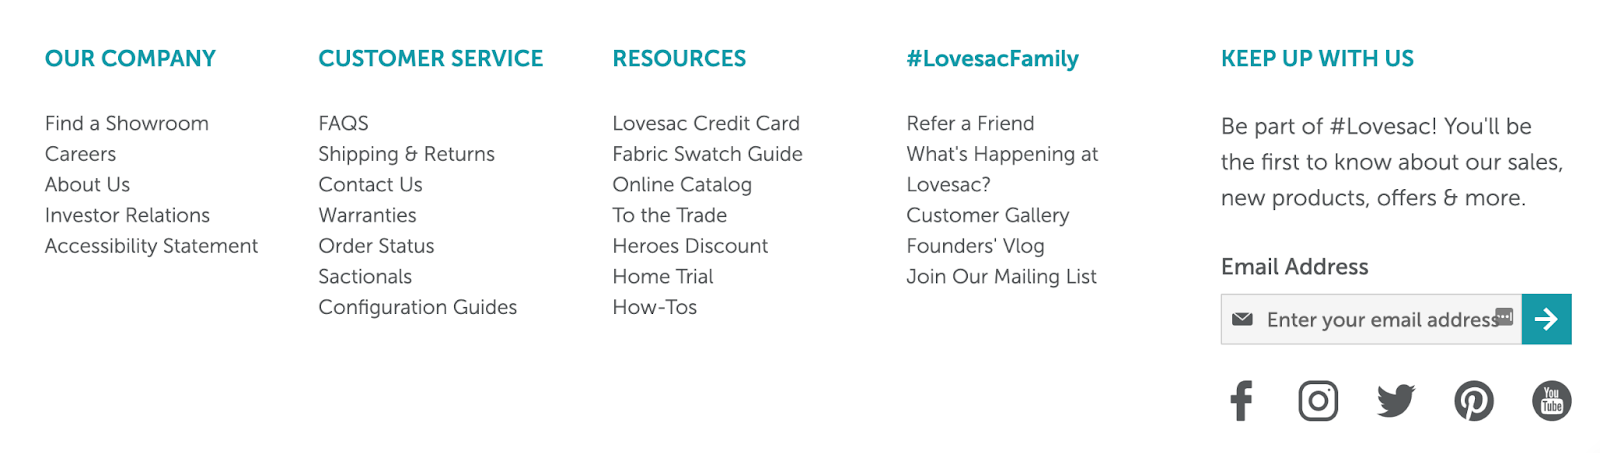 lovesac website homepage with resources and CTAs in the footer